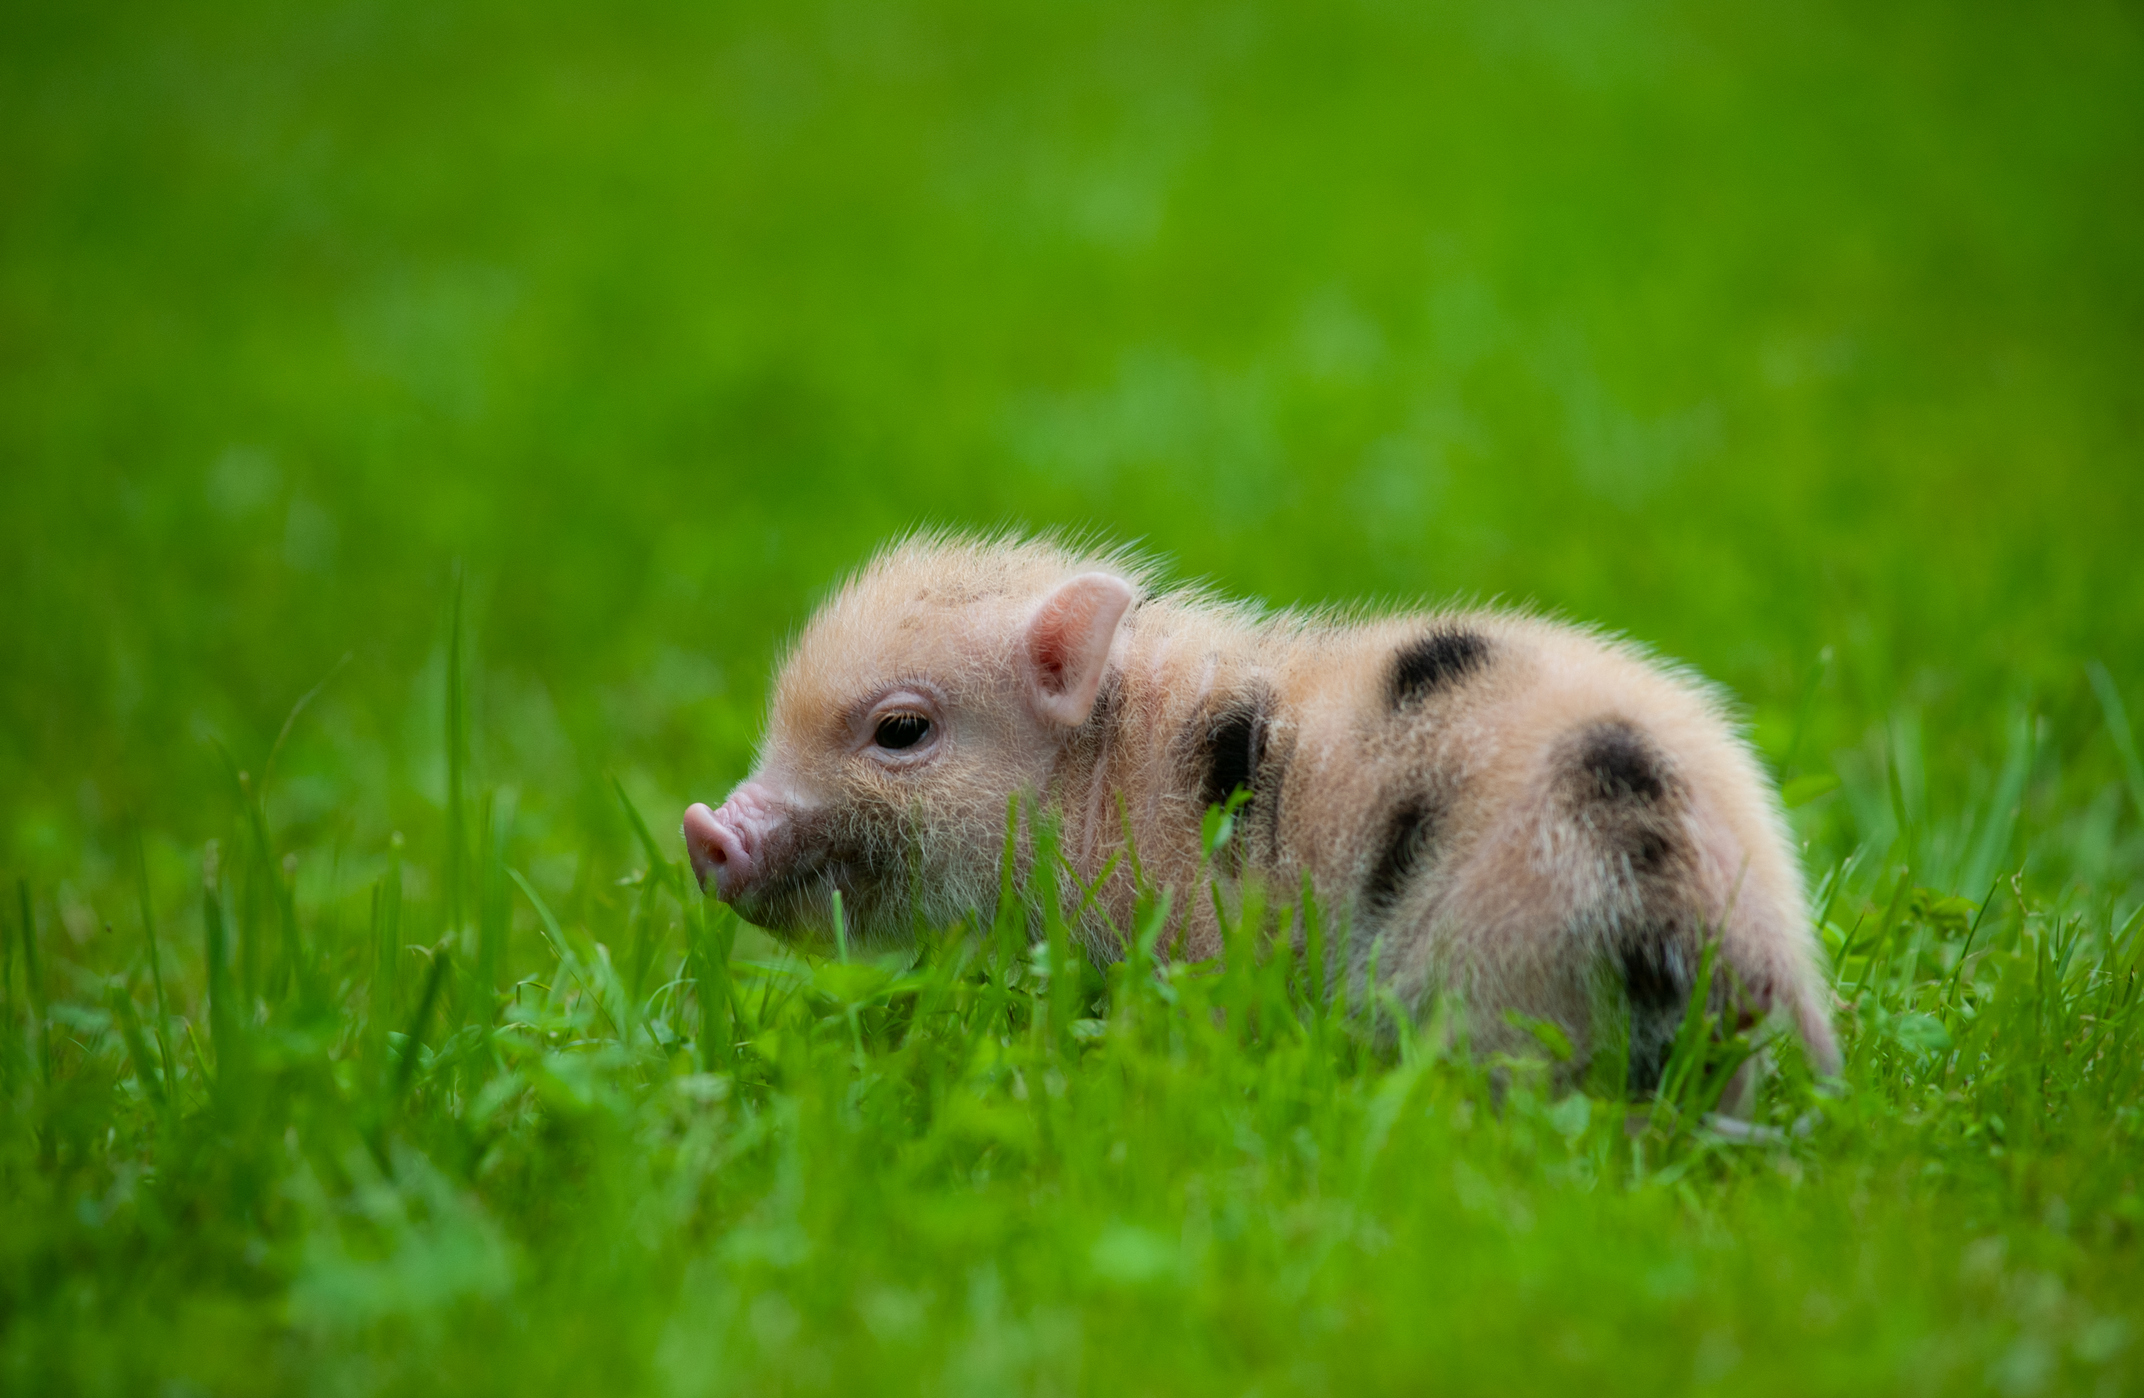 Piglet Loves Belly Scratches So Much, He Falls Over: 'Cutest Thing'